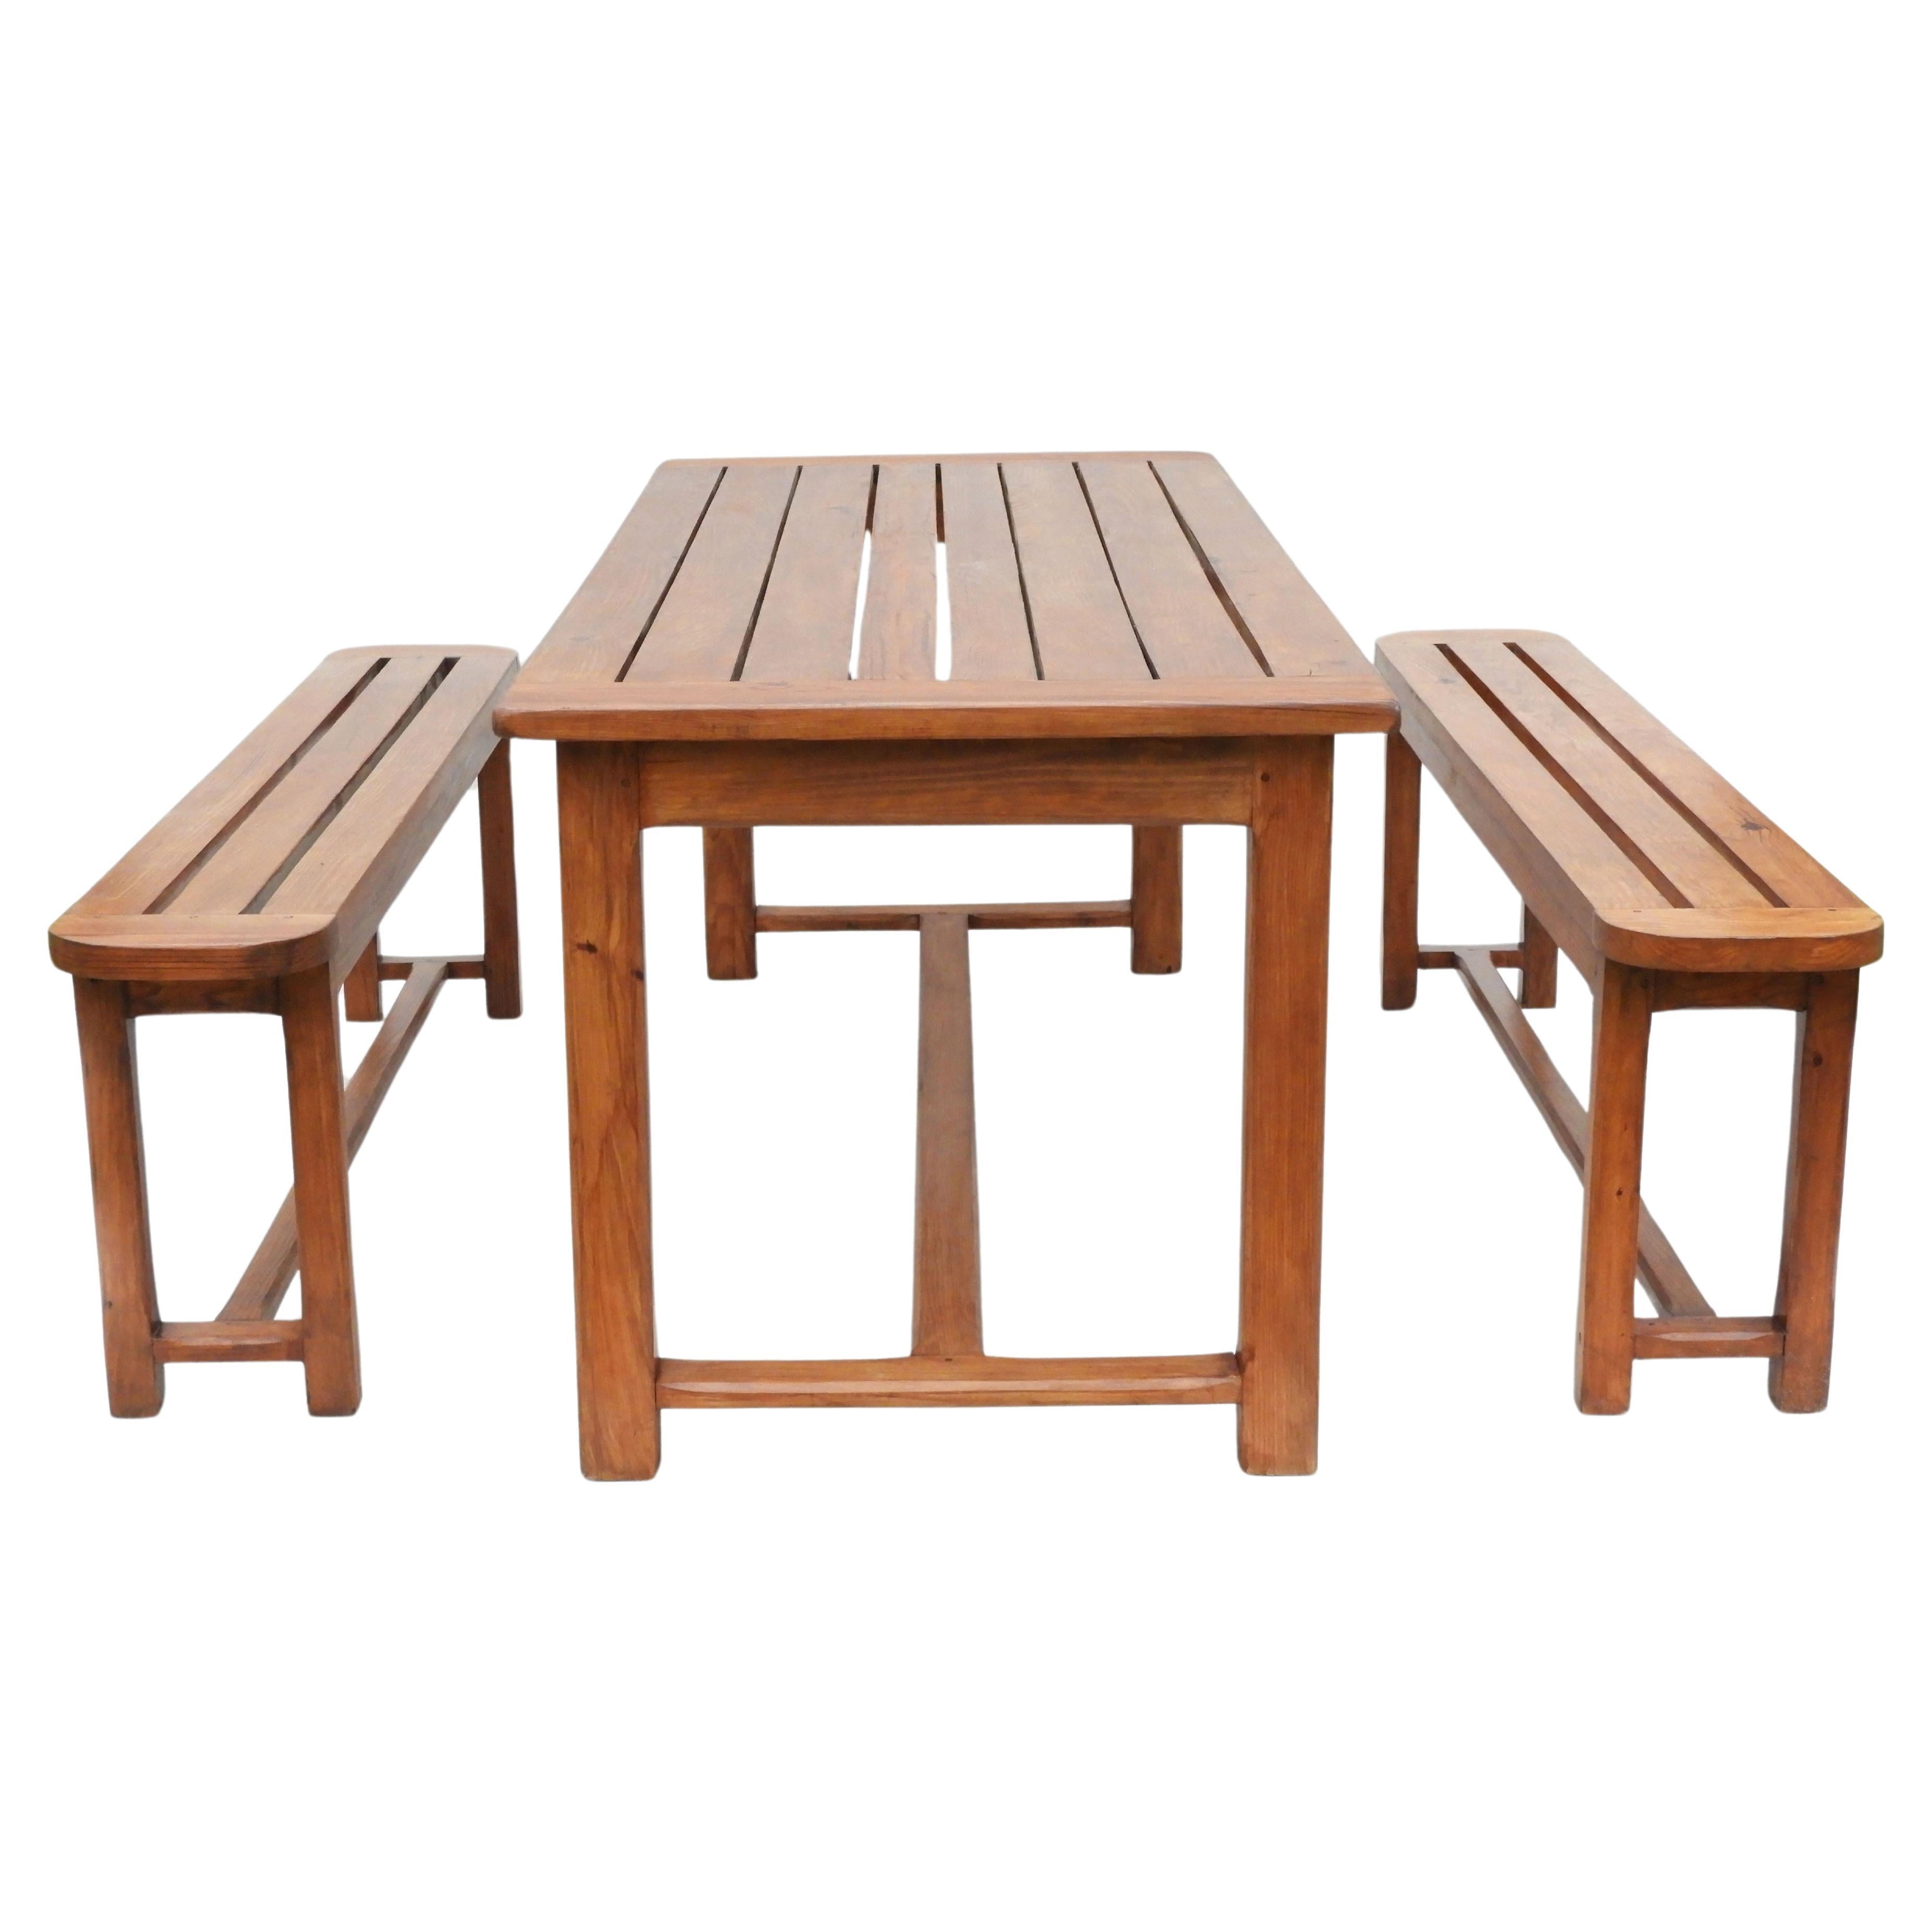 French Provincial Table & Bench Exterior Dining Set